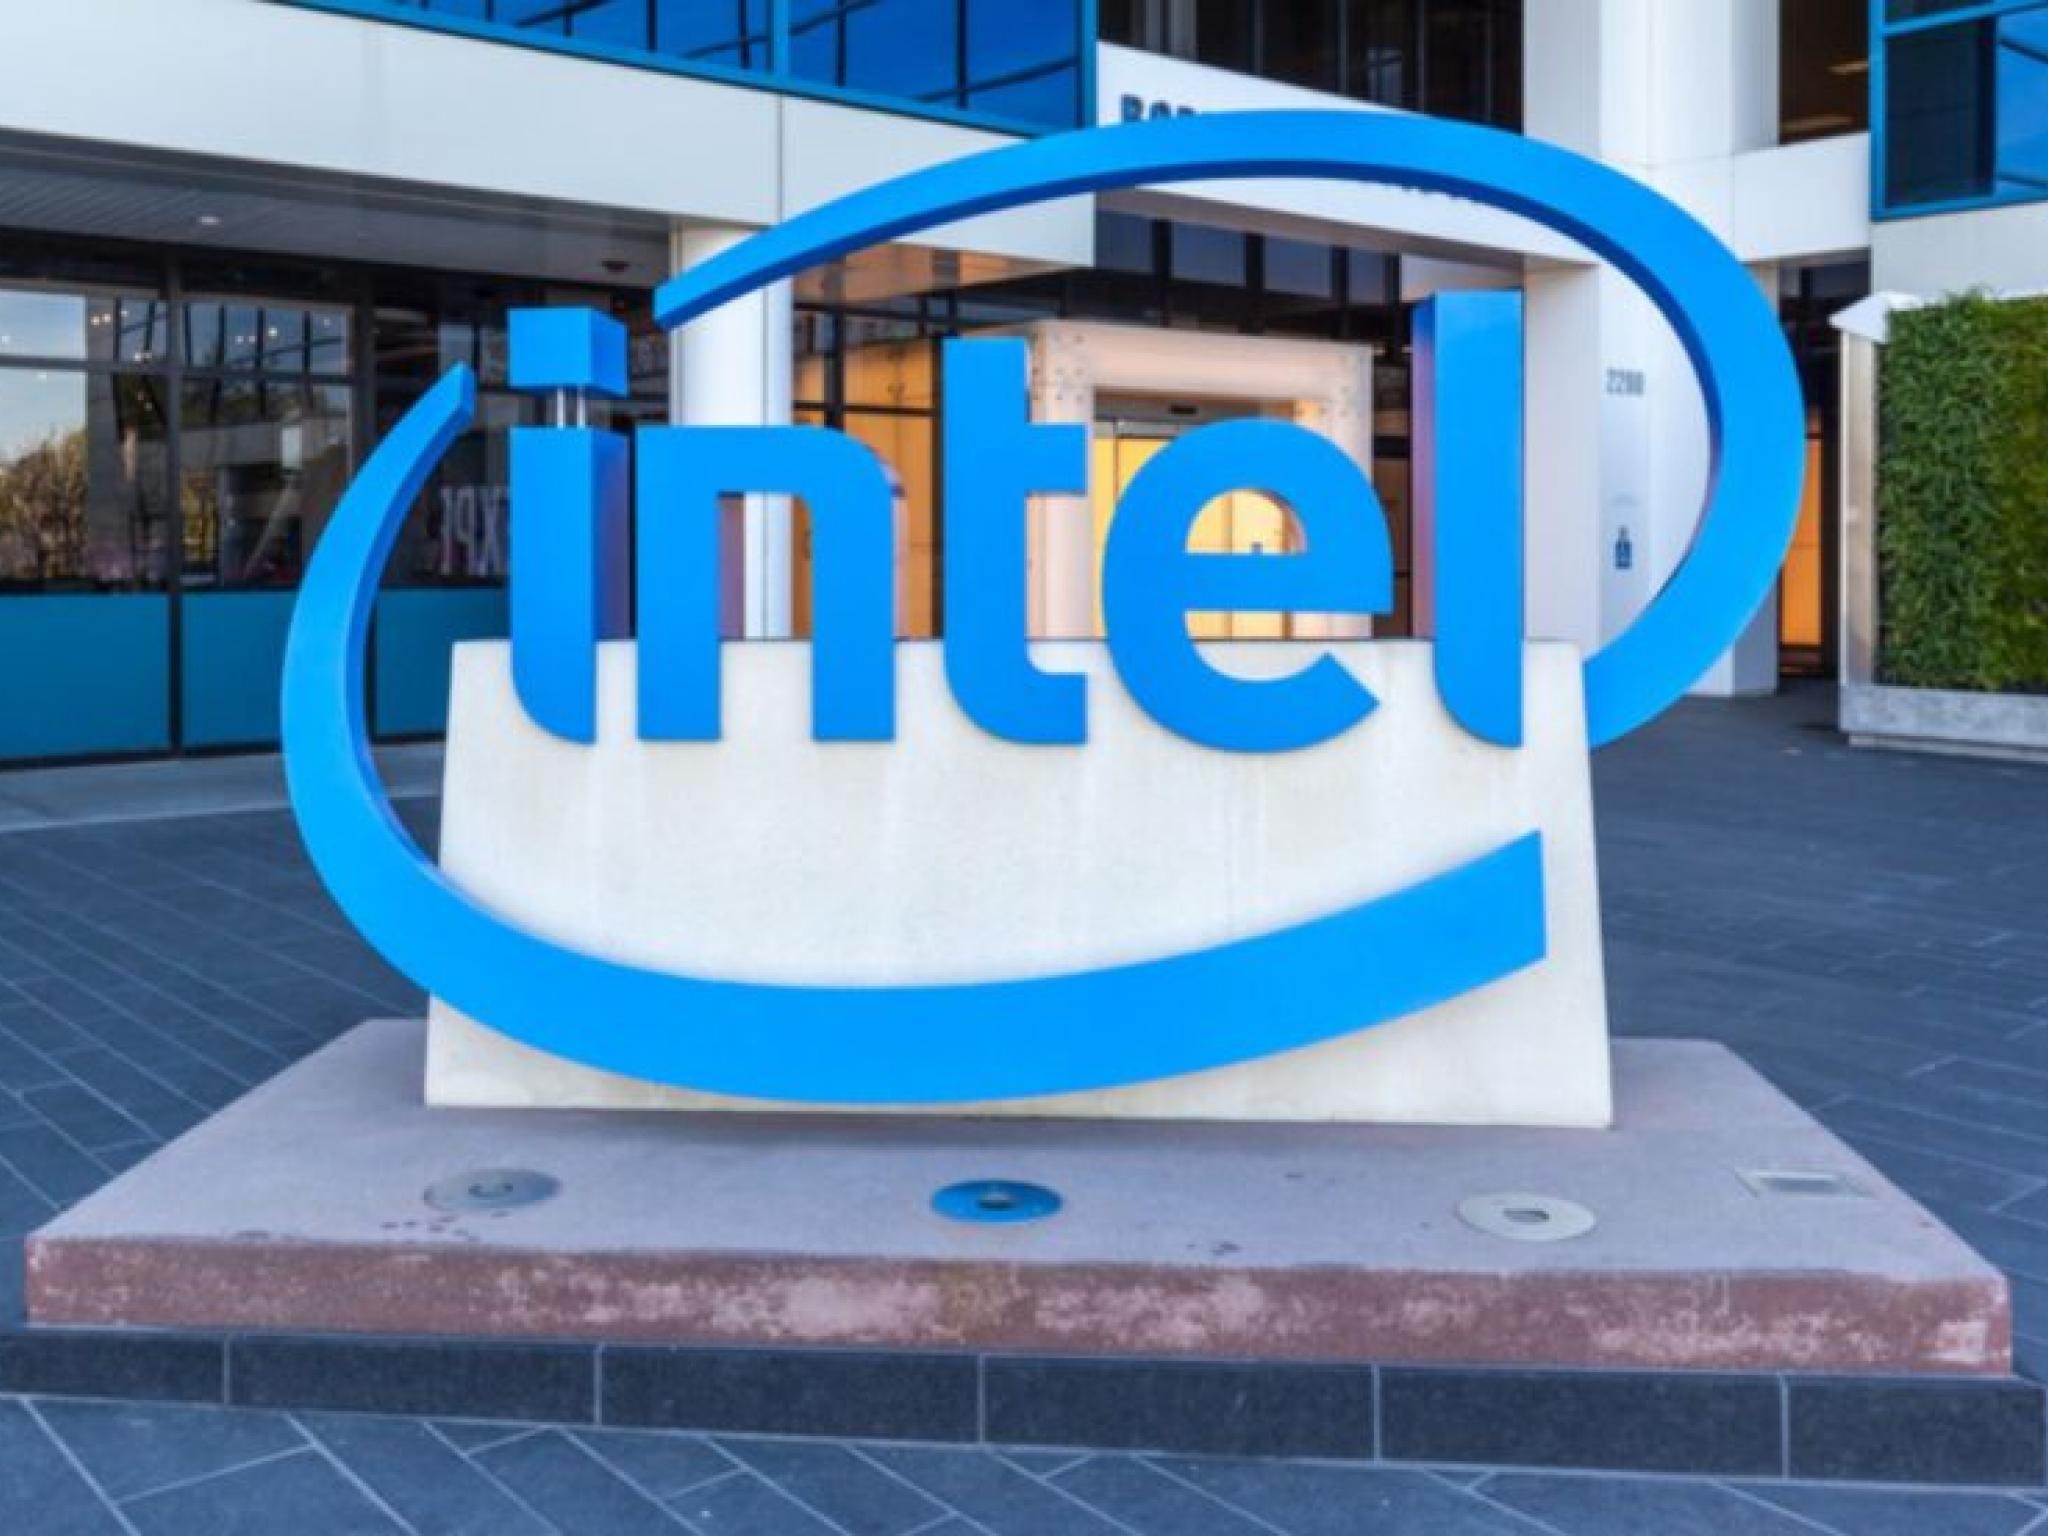  whats-going-on-with-intel-stock-tuesday 